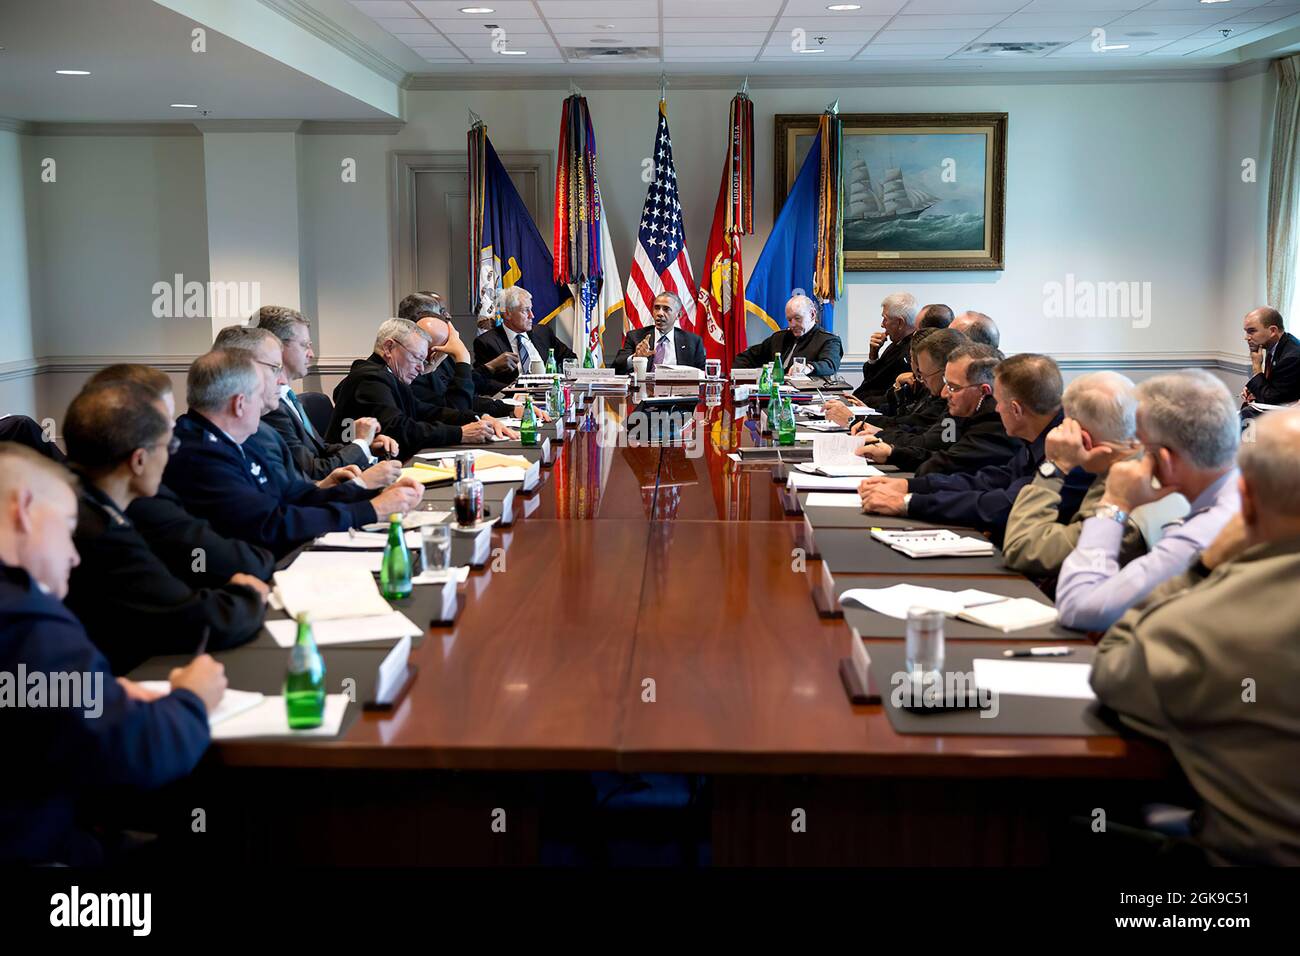 President Barack Obama meets with senior military leadership at the Pentagon in Arlington, Virginia, Oct. 8, 2014. Seated next to the President are Defense Secretary Chuck Hagel and Gen. Martin Dempsey, Chairman of the Joint Chiefs of Staff, right. (Official White House Photo by Pete Souza) This official White House photograph is being made available only for publication by news organizations and/or for personal use printing by the subject(s) of the photograph. The photograph may not be manipulated in any way and may not be used in commercial or political materials, advertisements, emails, pro Stock Photo